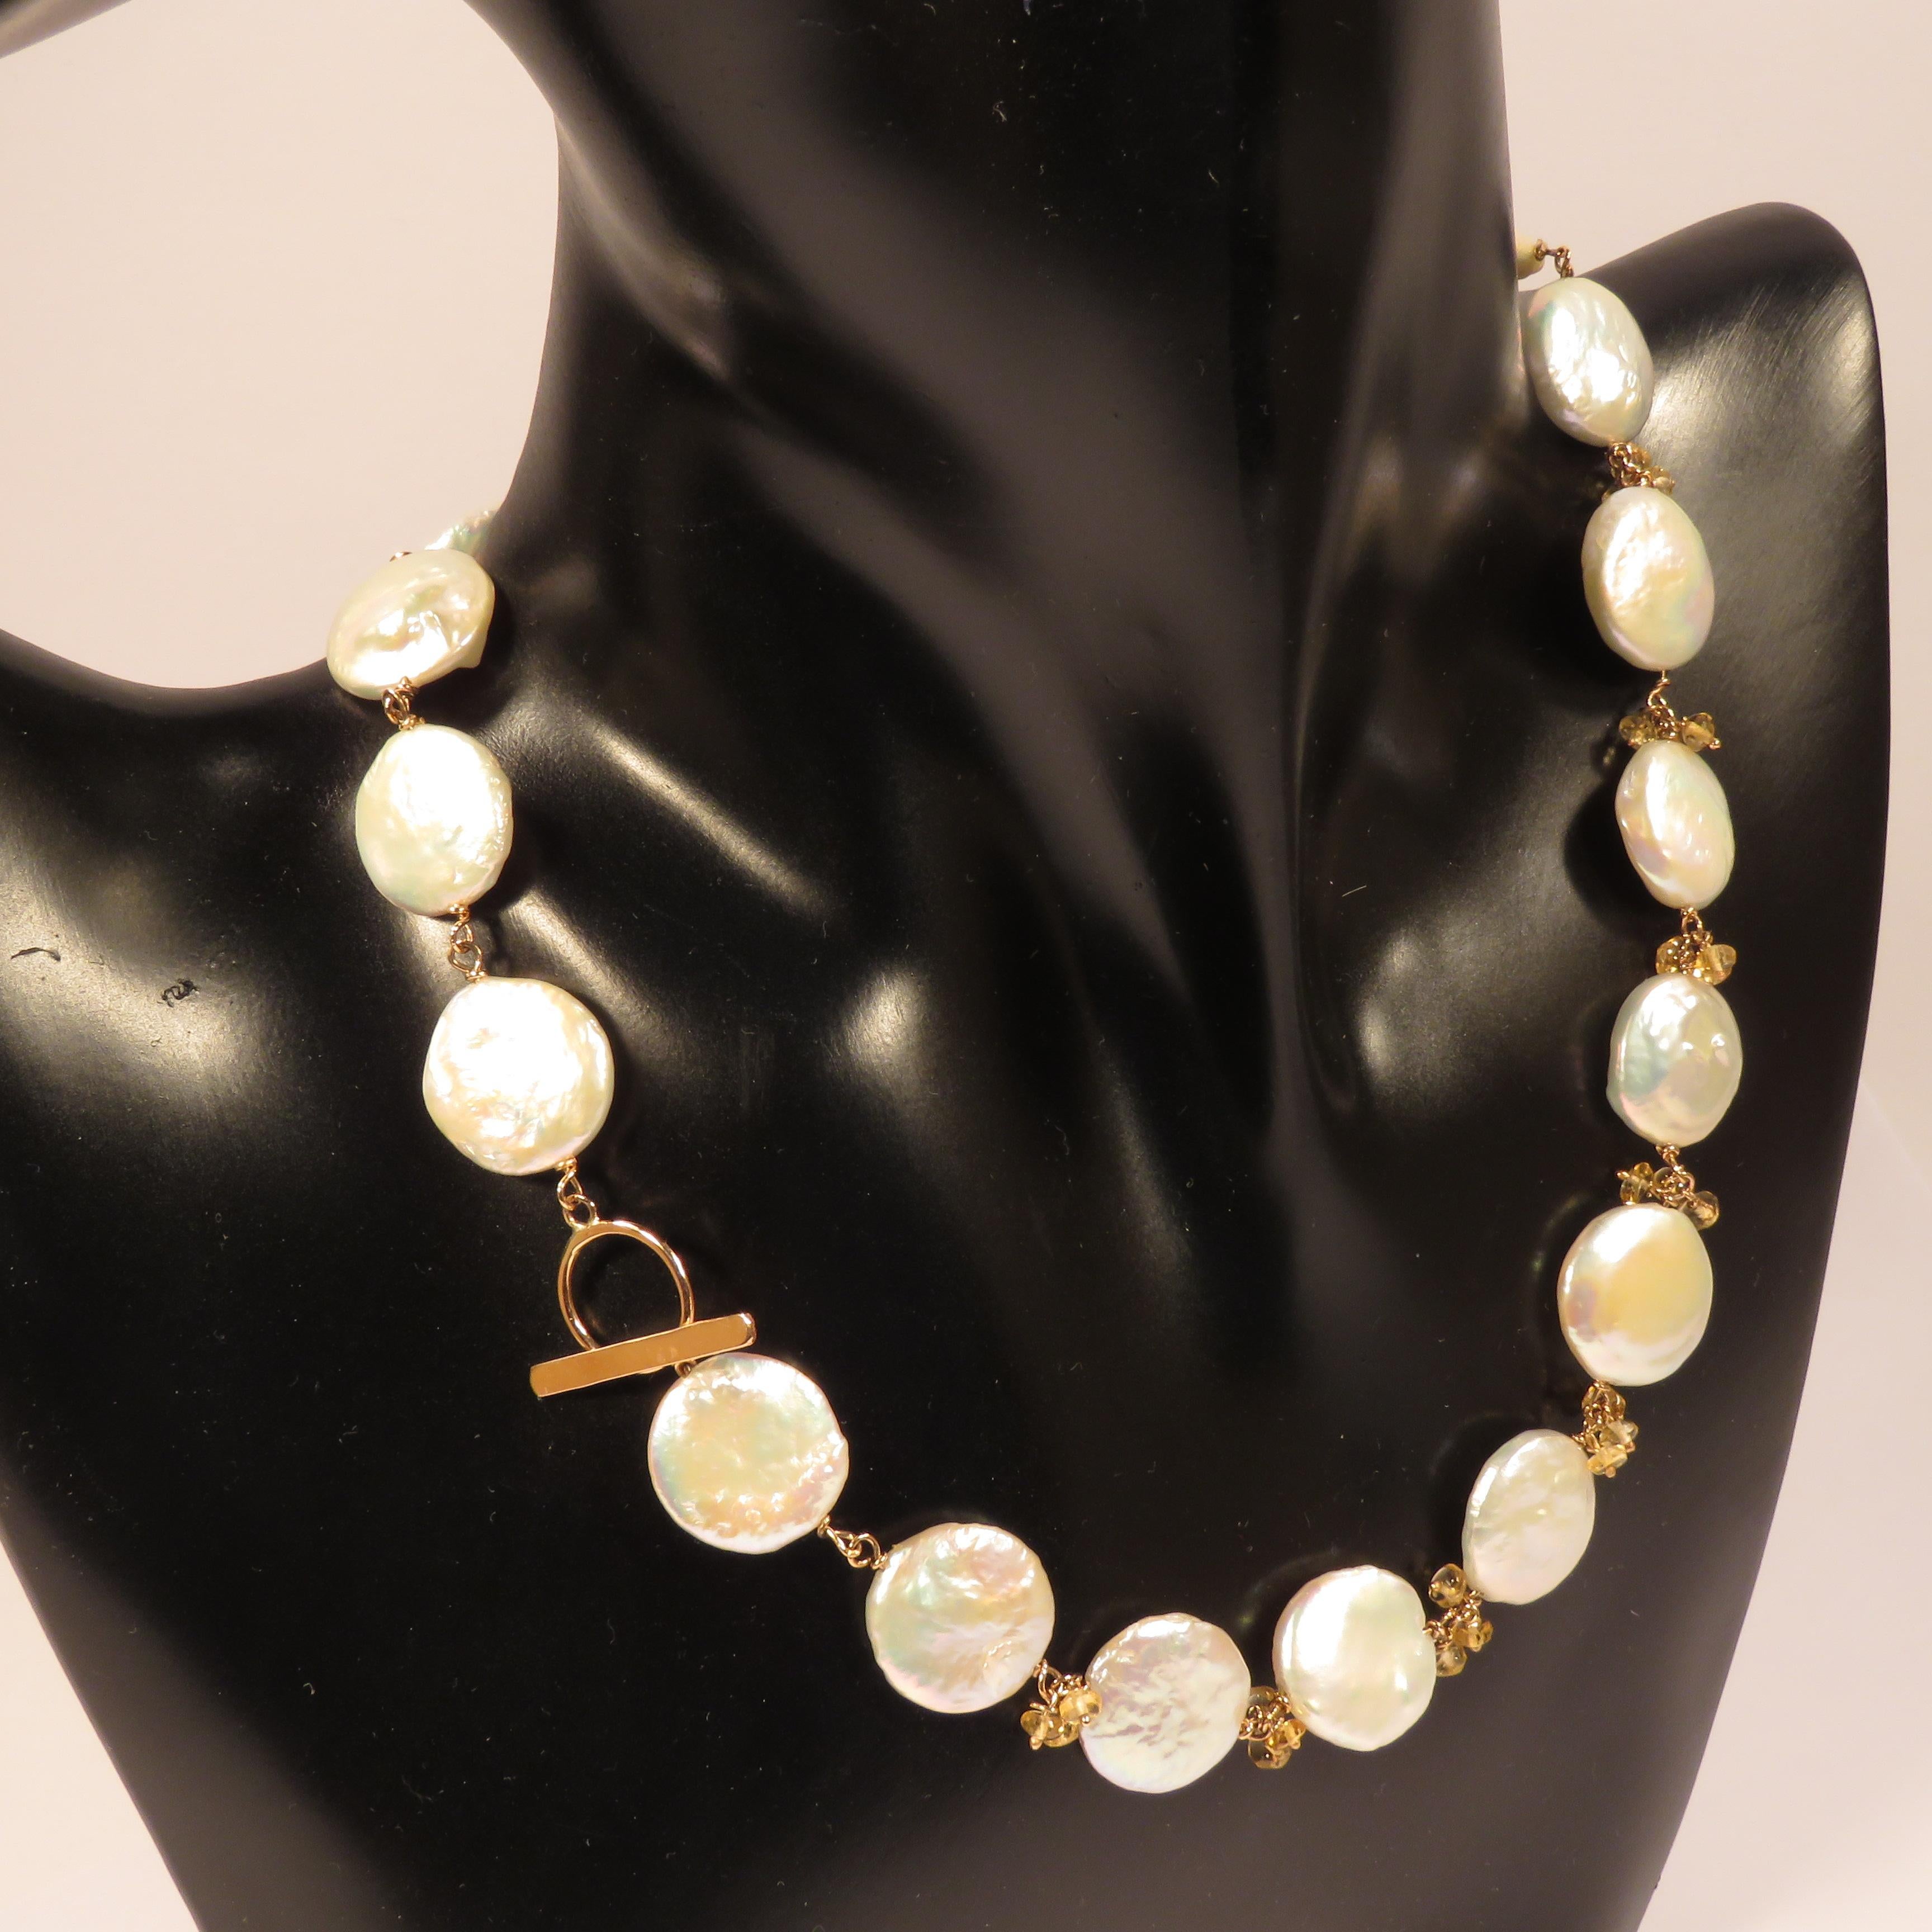 This freshwater white pearls necklace is chained in 9 karat rose gold with yellow citrines. The necklace lenght is 400 millimeters / 15.748 inches, the circumference of each pearl is 15 millimeters / 0.590 inches. This item is marked with the